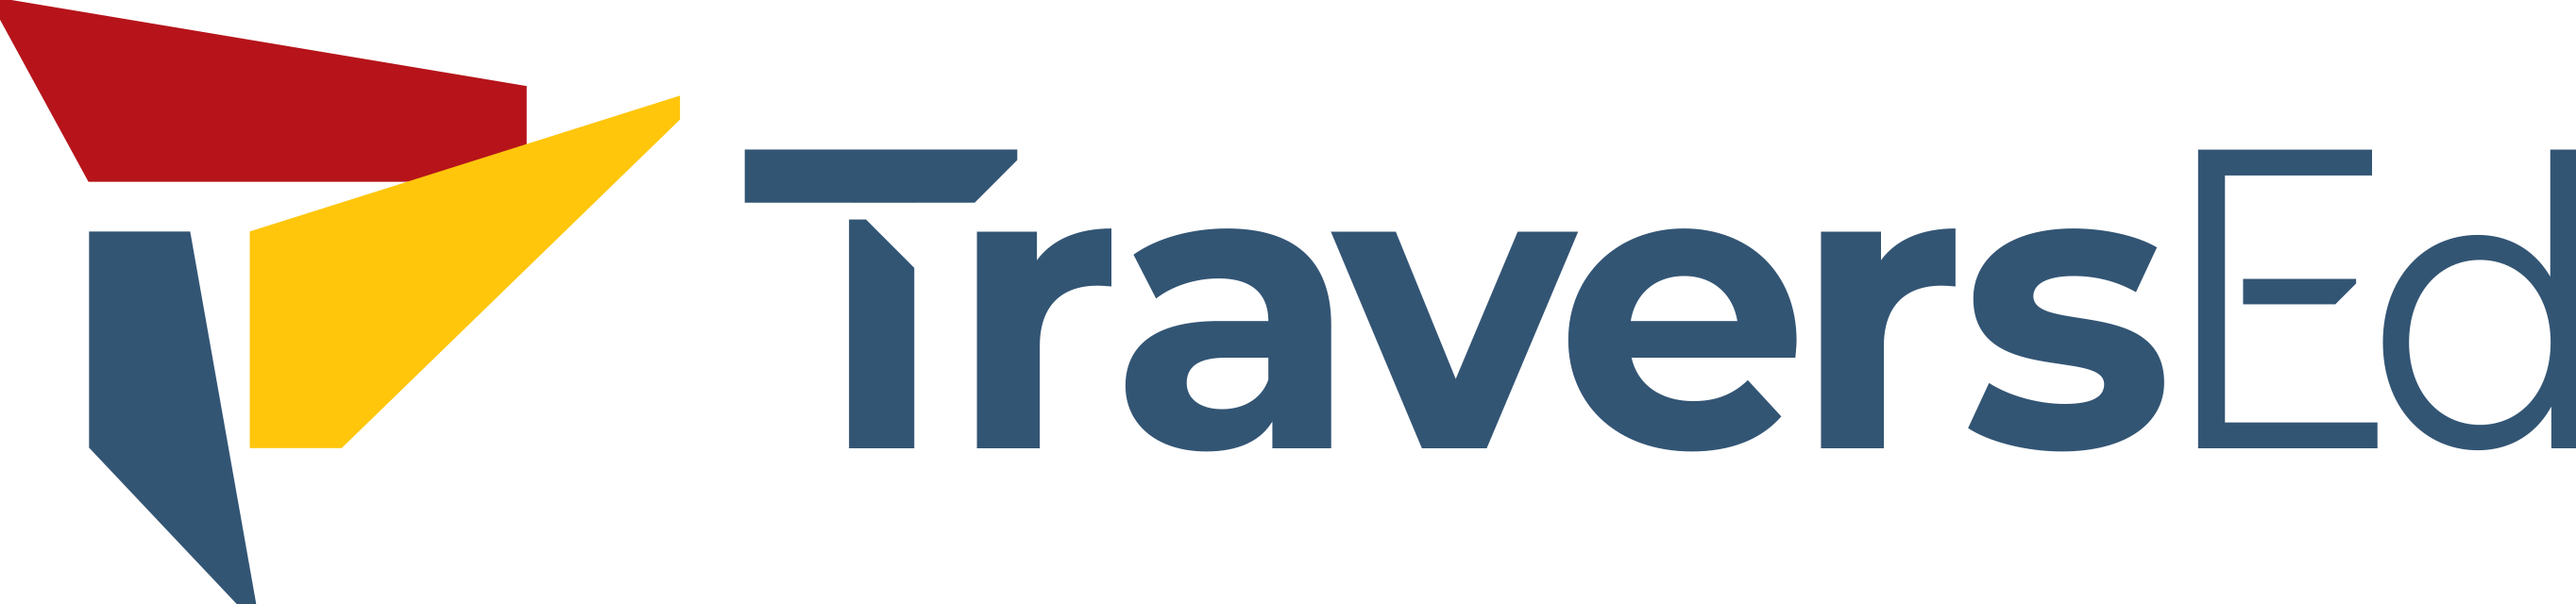 TraversEd: Global Courses & Training